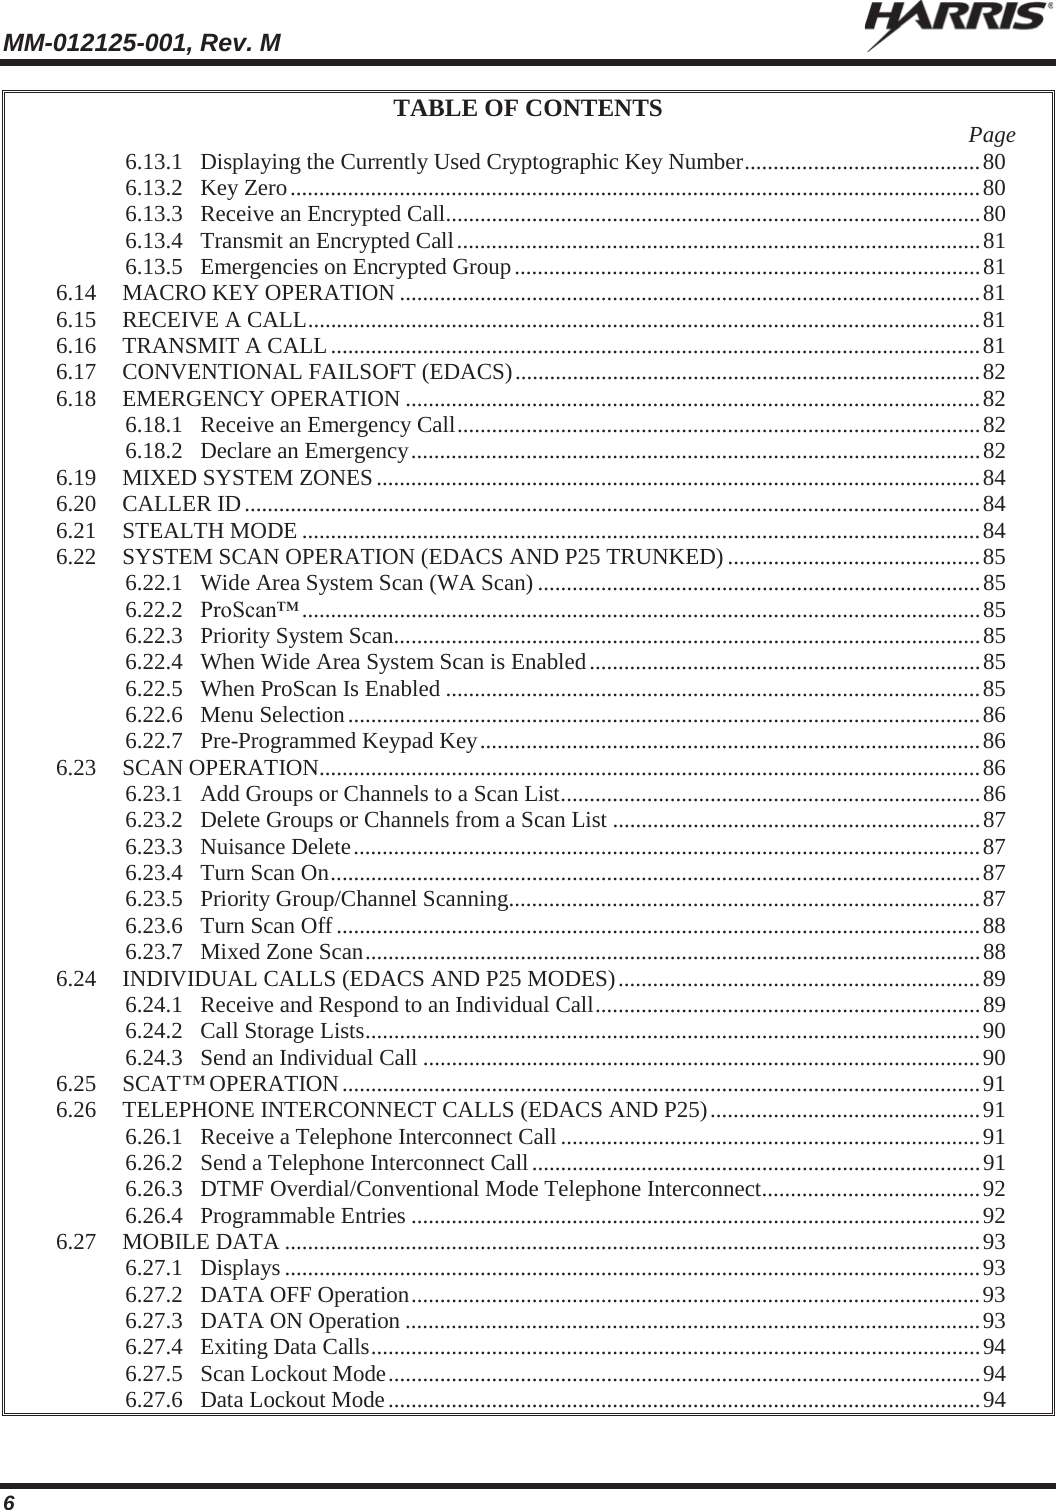 MM-012125-001, Rev. M   6 TABLE OF CONTENTS  Page 6.13.1 Displaying the Currently Used Cryptographic Key Number ......................................... 80 6.13.2 Key Zero ........................................................................................................................ 80 6.13.3 Receive an Encrypted Call ............................................................................................. 80 6.13.4 Transmit an Encrypted Call ........................................................................................... 81 6.13.5 Emergencies on Encrypted Group ................................................................................. 81 6.14 MACRO KEY OPERATION ..................................................................................................... 81 6.15 RECEIVE A CALL ..................................................................................................................... 81 6.16 TRANSMIT A CALL ................................................................................................................. 81 6.17 CONVENTIONAL FAILSOFT (EDACS) ................................................................................. 82 6.18 EMERGENCY OPERATION .................................................................................................... 82 6.18.1 Receive an Emergency Call ........................................................................................... 82 6.18.2 Declare an Emergency ................................................................................................... 82 6.19 MIXED SYSTEM ZONES ......................................................................................................... 84 6.20 CALLER ID ................................................................................................................................ 84 6.21 STEALTH MODE ...................................................................................................................... 84 6.22 SYSTEM SCAN OPERATION (EDACS AND P25 TRUNKED) ............................................ 85 6.22.1 Wide Area System Scan (WA Scan) ............................................................................. 85 6.22.2 ProScan™ ...................................................................................................................... 85 6.22.3 Priority System Scan...................................................................................................... 85 6.22.4 When Wide Area System Scan is Enabled .................................................................... 85 6.22.5 When ProScan Is Enabled ............................................................................................. 85 6.22.6 Menu Selection .............................................................................................................. 86 6.22.7 Pre-Programmed Keypad Key ....................................................................................... 86 6.23 SCAN OPERATION................................................................................................................... 86 6.23.1 Add Groups or Channels to a Scan List ......................................................................... 86 6.23.2 Delete Groups or Channels from a Scan List ................................................................ 87 6.23.3 Nuisance Delete ............................................................................................................. 87 6.23.4 Turn Scan On ................................................................................................................. 87 6.23.5 Priority Group/Channel Scanning .................................................................................. 87 6.23.6 Turn Scan Off ................................................................................................................ 88 6.23.7 Mixed Zone Scan ........................................................................................................... 88 6.24 INDIVIDUAL CALLS (EDACS AND P25 MODES) ............................................................... 89 6.24.1 Receive and Respond to an Individual Call ................................................................... 89 6.24.2 Call Storage Lists ........................................................................................................... 90 6.24.3 Send an Individual Call ................................................................................................. 90 6.25 SCAT™ OPERATION ............................................................................................................... 91 6.26 TELEPHONE INTERCONNECT CALLS (EDACS AND P25) ............................................... 91 6.26.1 Receive a Telephone Interconnect Call ......................................................................... 91 6.26.2 Send a Telephone Interconnect Call .............................................................................. 91 6.26.3 DTMF Overdial/Conventional Mode Telephone Interconnect ...................................... 92 6.26.4 Programmable Entries ................................................................................................... 92 6.27 MOBILE DATA ......................................................................................................................... 93 6.27.1 Displays ......................................................................................................................... 93 6.27.2 DATA OFF Operation ................................................................................................... 93 6.27.3 DATA ON Operation .................................................................................................... 93 6.27.4 Exiting Data Calls .......................................................................................................... 94 6.27.5 Scan Lockout Mode ....................................................................................................... 94 6.27.6 Data Lockout Mode ....................................................................................................... 94 